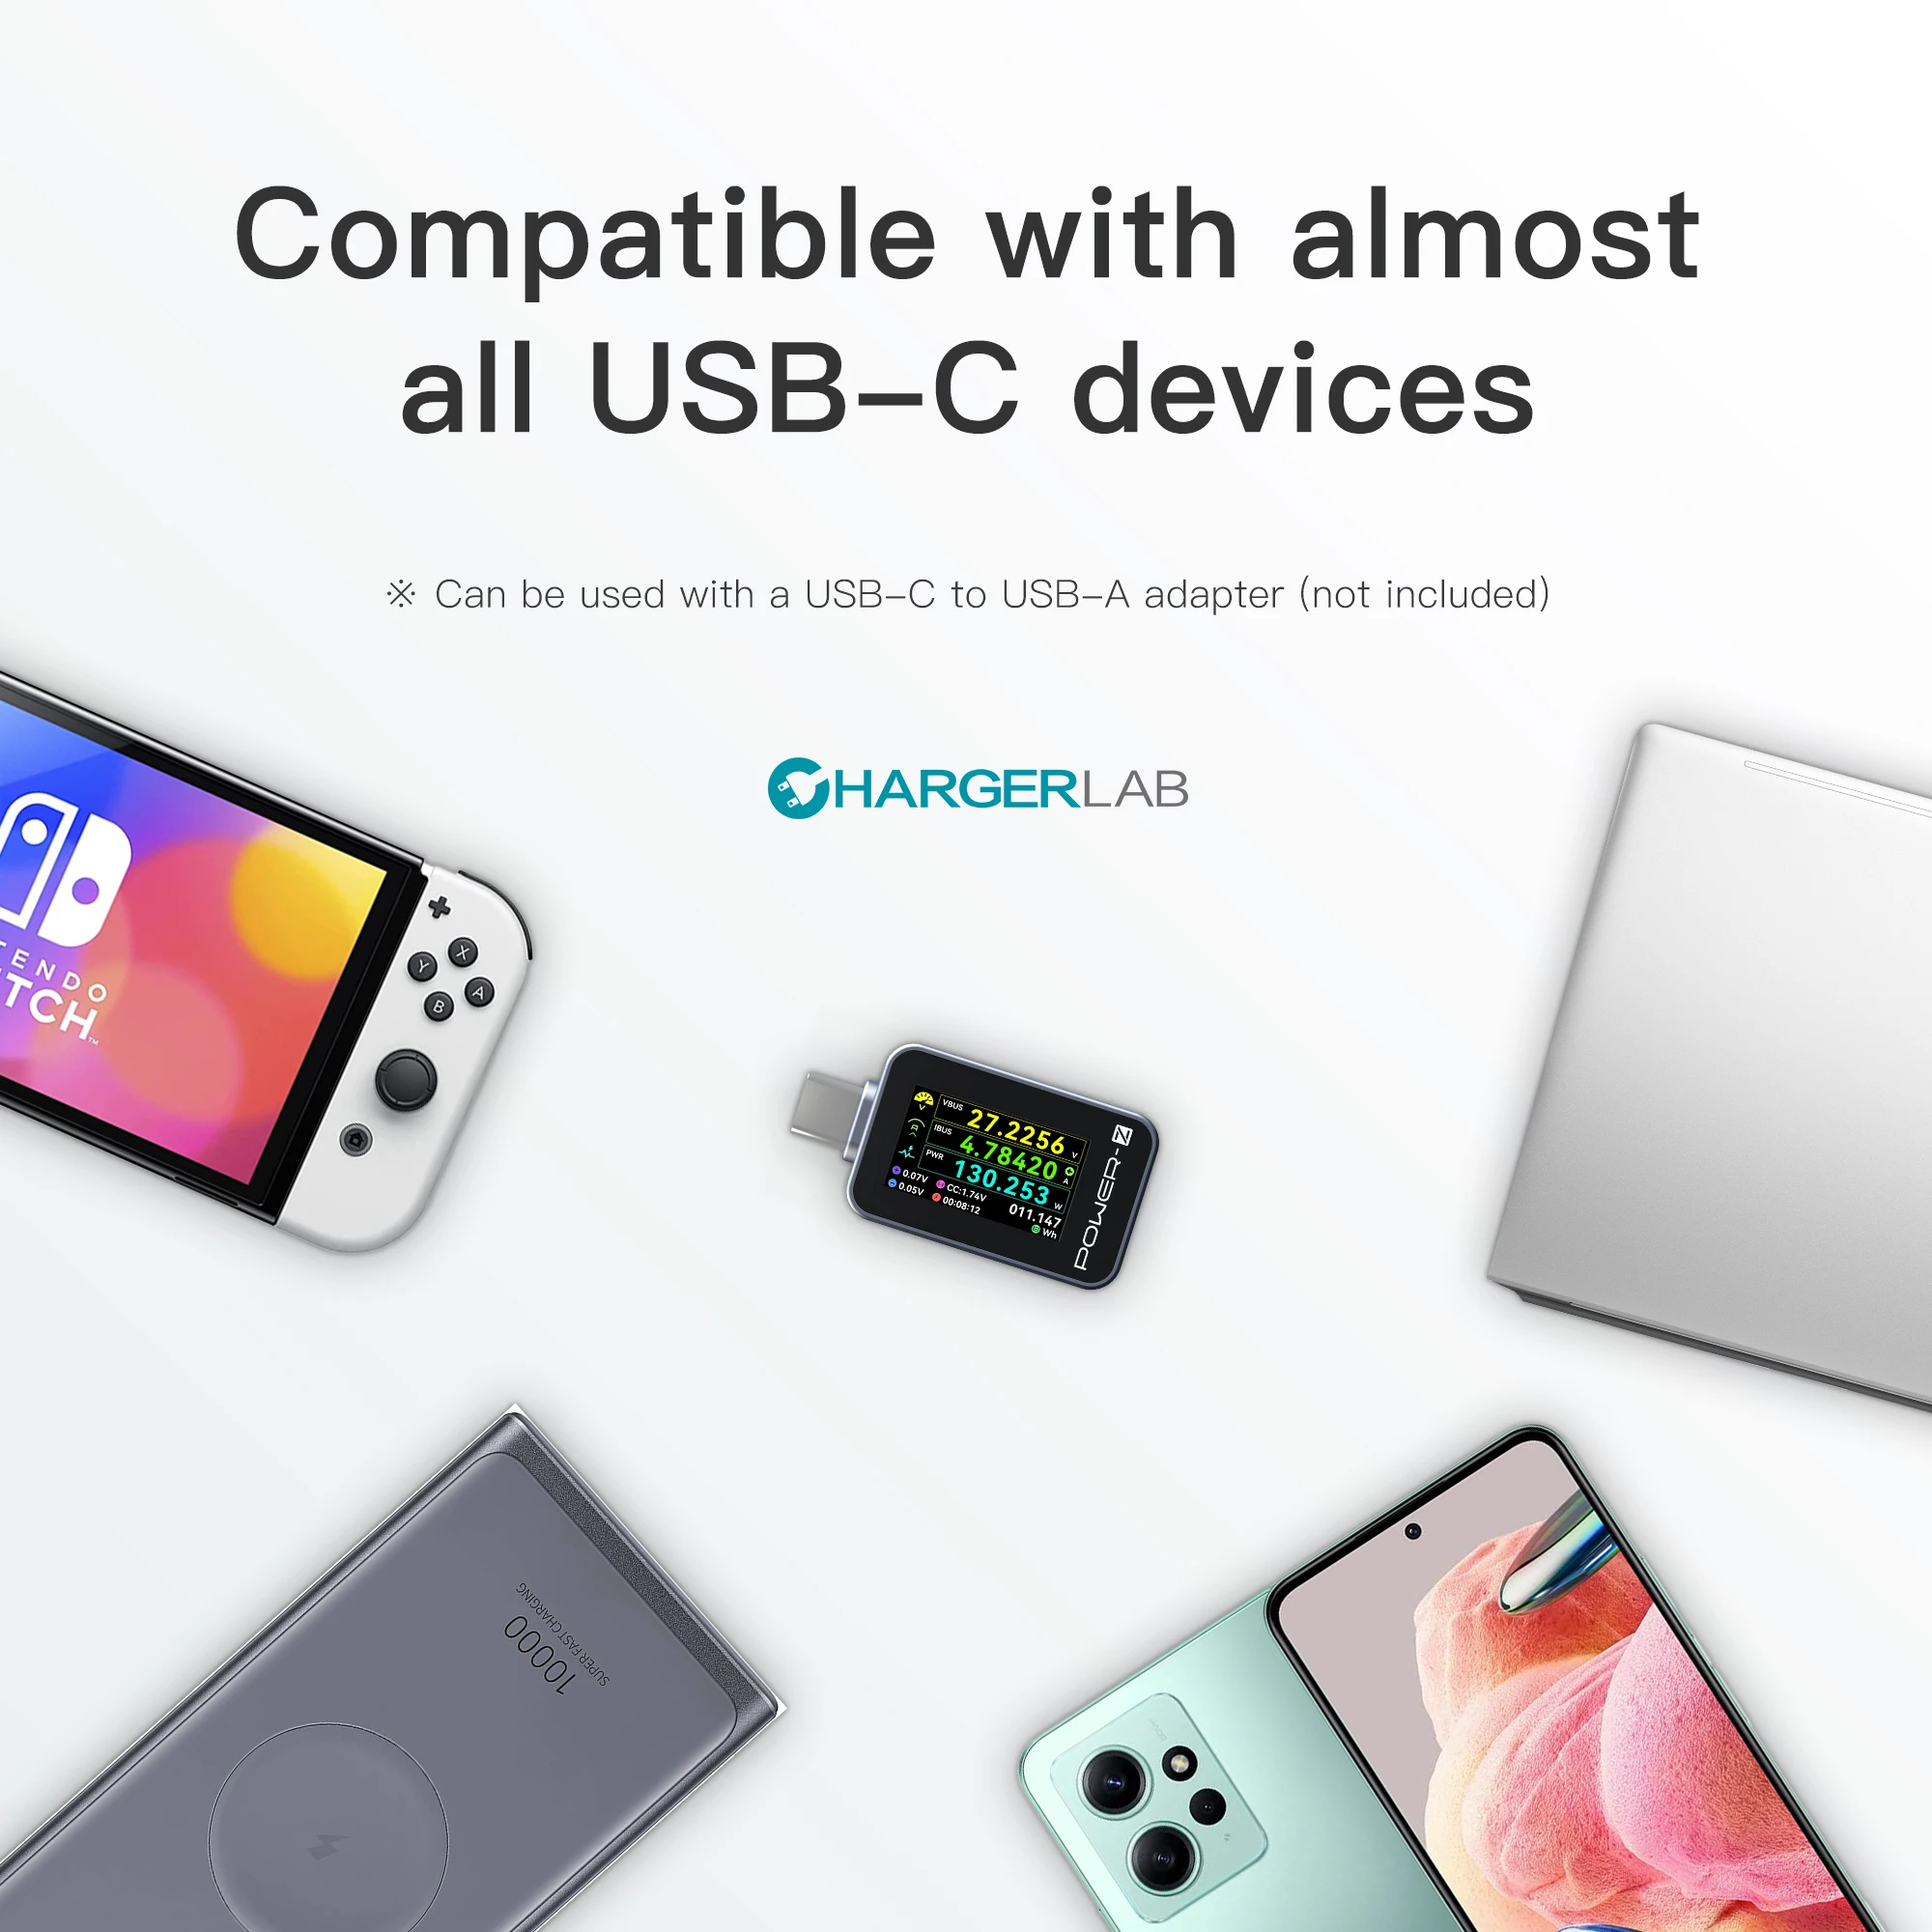 ChargerLAB POWER-Z C240 portable USB-C tester, digital power meter, supports 240W pd3.1 qc5.0,  USB-C phones, laptops, Chargers